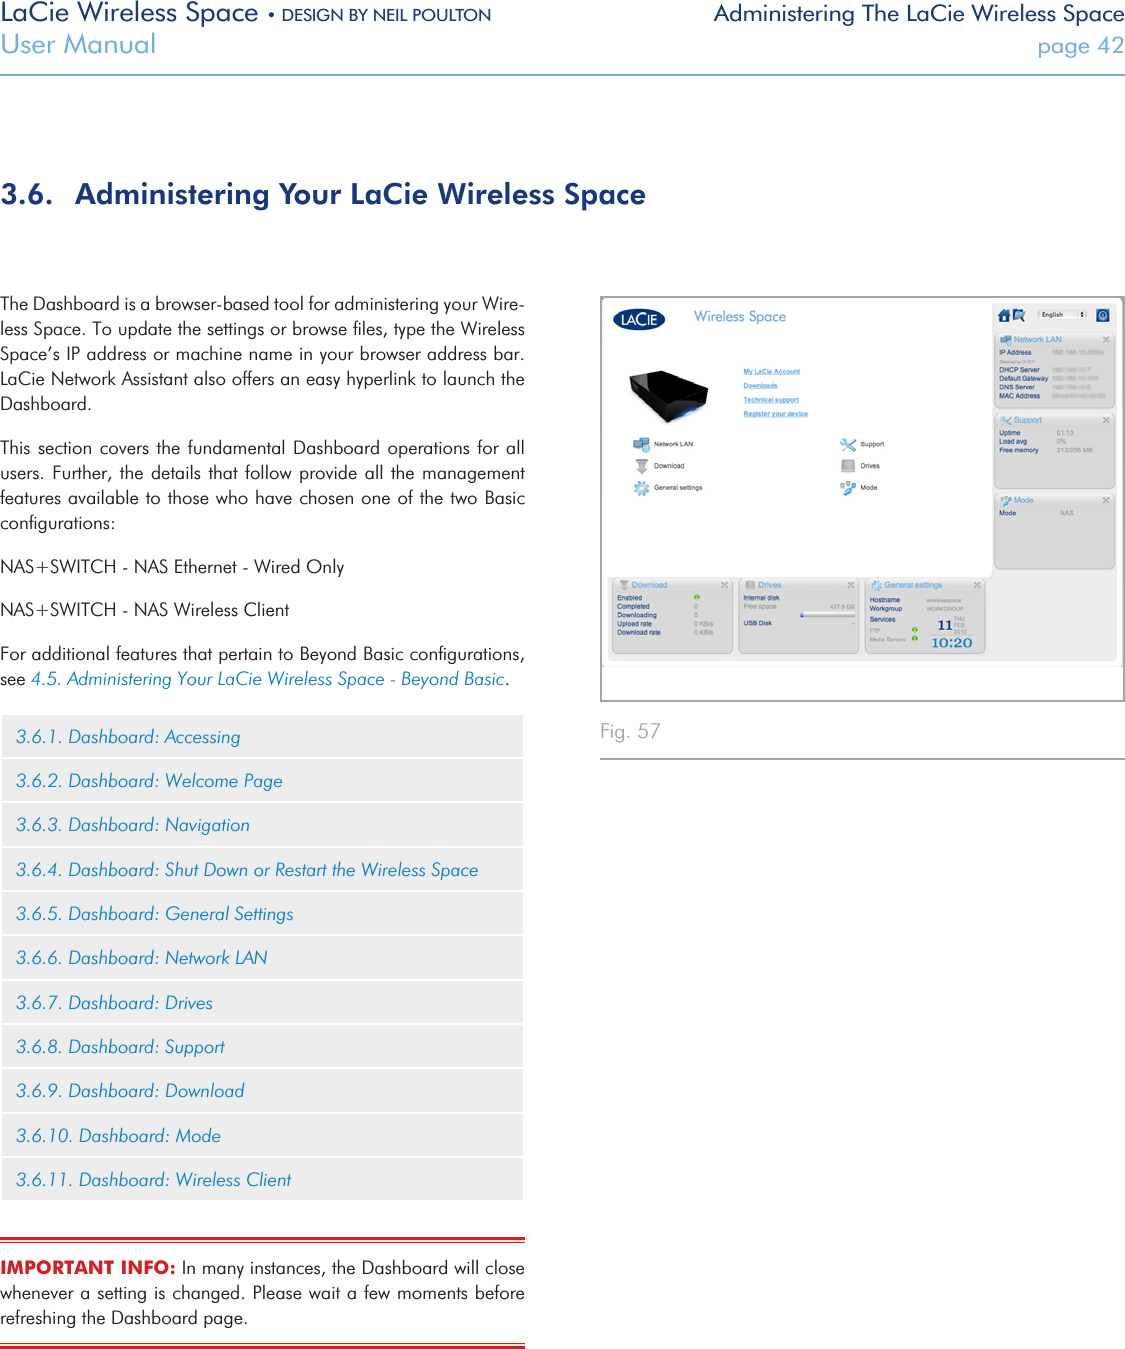 LaCie Wireless Space • DESIGN BY NEIL POULTON Administering The LaCie Wireless SpaceUser Manual  page 42The Dashboard is a browser-based tool for administering your Wire-less Space. To update the settings or browse ﬁles, type the Wireless Space’s IP address or machine name in your browser address bar. LaCie Network Assistant also offers an easy hyperlink to launch the Dashboard.This section covers the fundamental  Dashboard  operations for all users. Further, the details  that follow provide all  the management features available to those who have chosen one of the two Basic conﬁgurations:NAS+SWITCH - NAS Ethernet - Wired OnlyNAS+SWITCH - NAS Wireless ClientFor additional features that pertain to Beyond Basic conﬁgurations, see 4.5. Administering Your LaCie Wireless Space - Beyond Basic.3.6.1. Dashboard: Accessing3.6.2. Dashboard: Welcome Page3.6.3. Dashboard: Navigation3.6.4. Dashboard: Shut Down or Restart the Wireless Space3.6.5. Dashboard: General Settings3.6.6. Dashboard: Network LAN3.6.7. Dashboard: Drives3.6.8. Dashboard: Support3.6.9. Dashboard: Download3.6.10. Dashboard: Mode3.6.11. Dashboard: Wireless ClientIMPORTANT INFO: In many instances, the Dashboard will close whenever a setting is changed. Please wait a few moments before refreshing the Dashboard page.3.6.  Administering Your LaCie Wireless SpaceFig. 57 